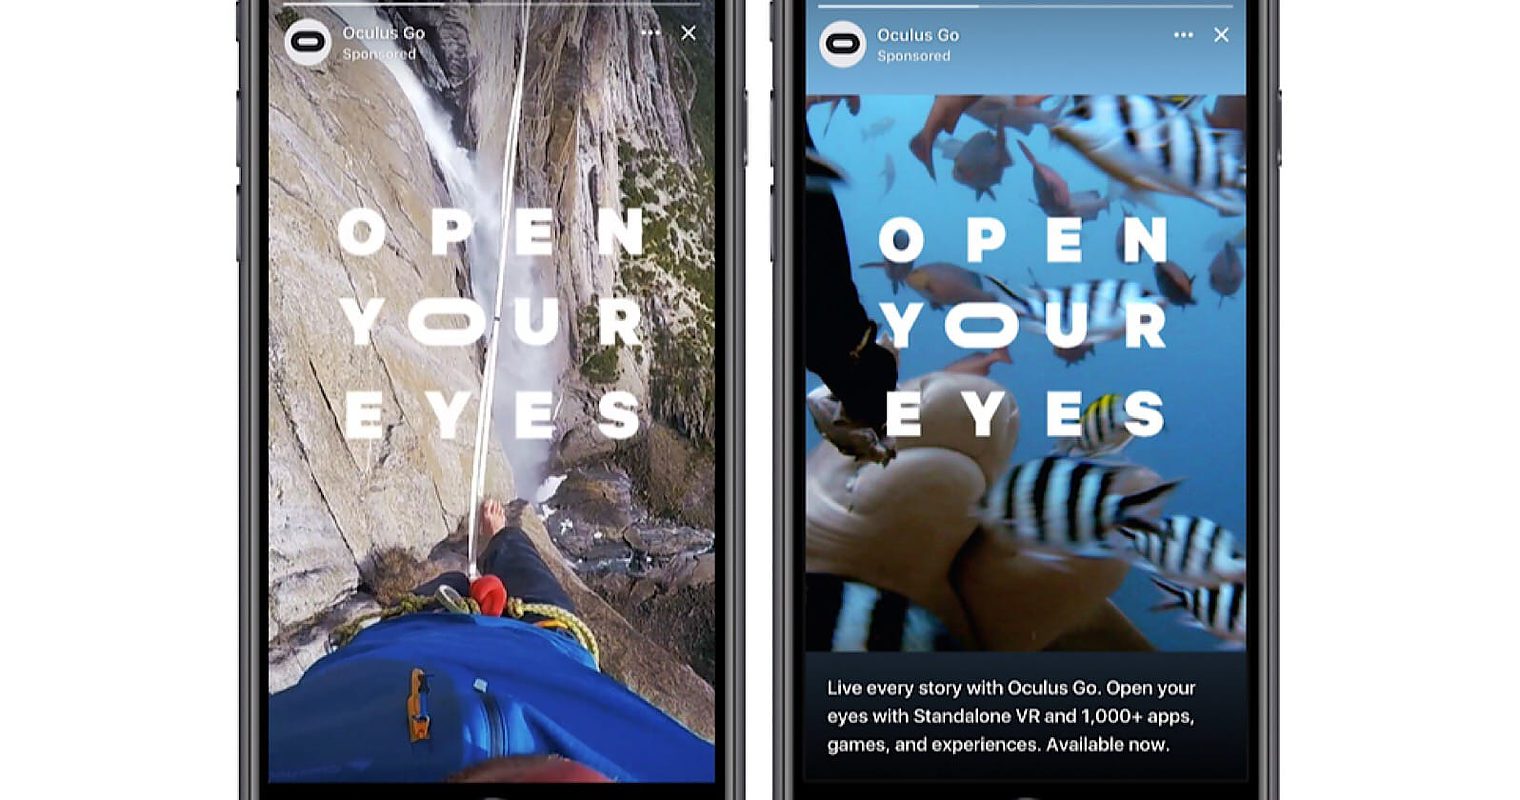 Facebook Introduces Ads in Stories After Reaching 150M Daily Viewers